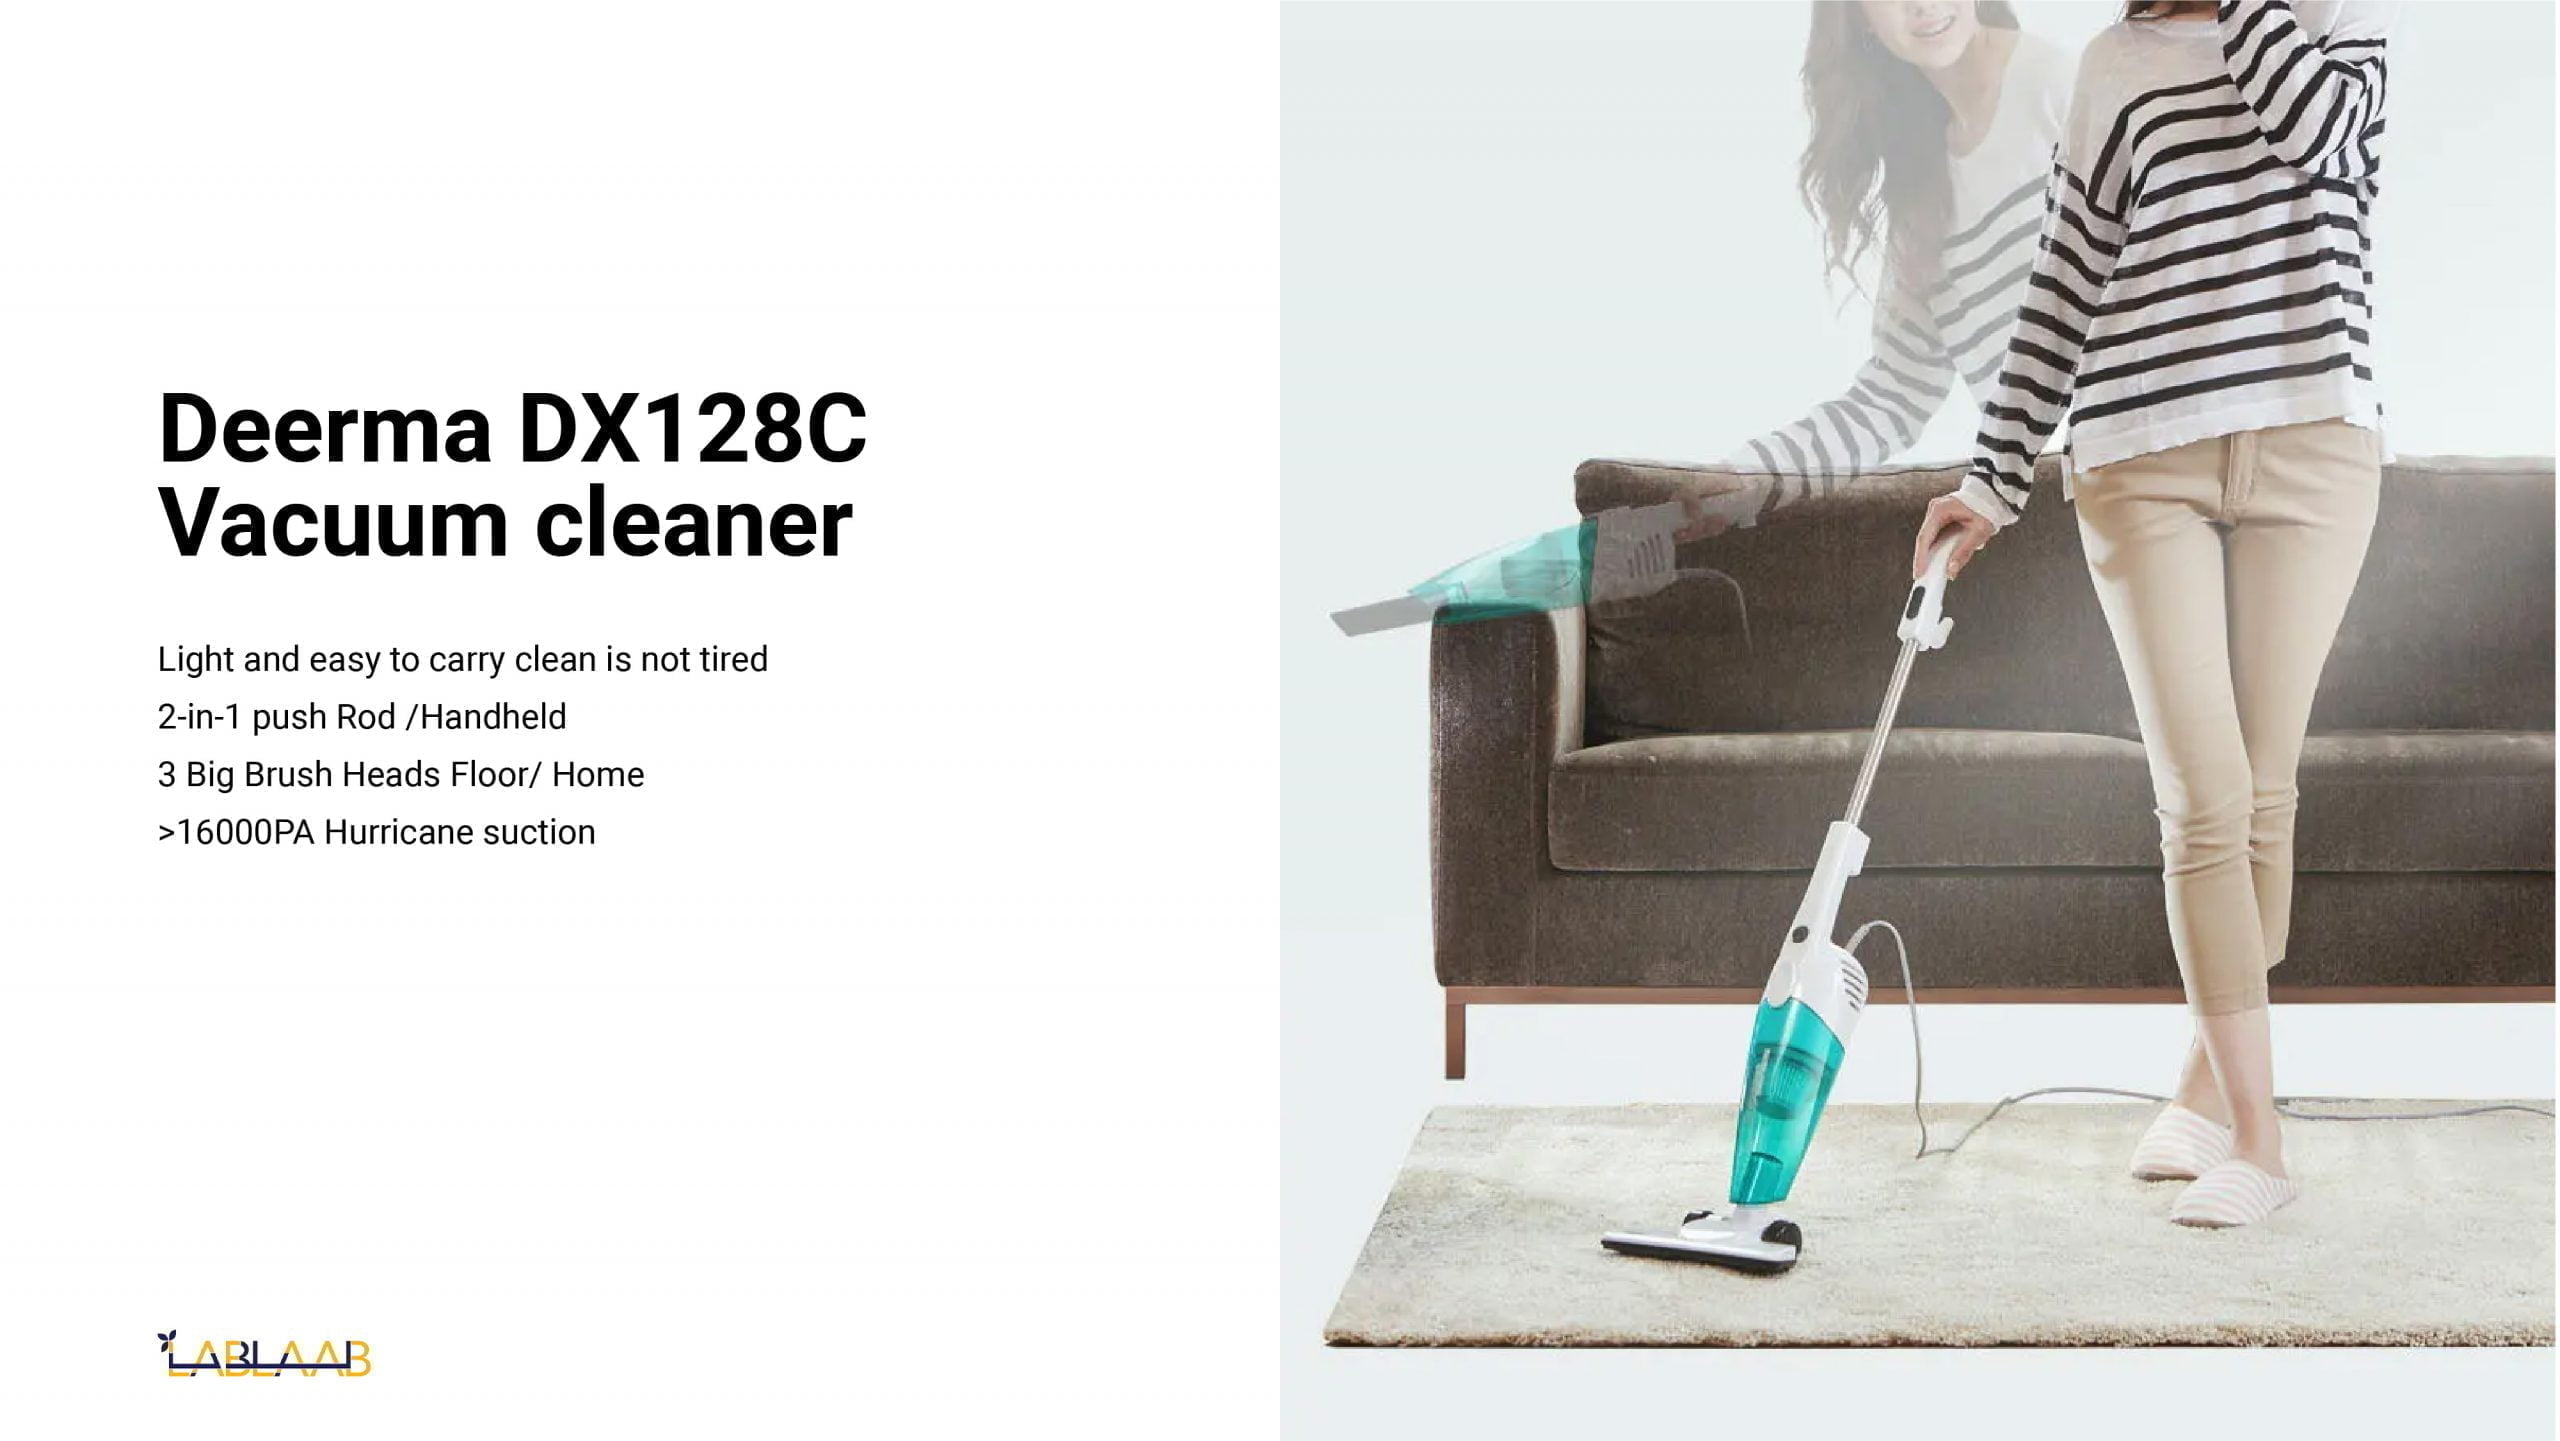 Vacuum 333 01 Scaled Xiaomi Deerma Dx118C Upright Vacuum Cleaner Mini 2-In-1 Pushrod Handheld Cleaner With 16000Pa Super Suction- Green Https://Www.youtube.com/Watch?V=A4_Ujrhyw_I Deerma Dx118C Vacuum Cleaner Deerma Dx118C Vacuum Cleaner 2-In-1 Pushrod Handheld Cleaner With 16000Pa Super Suction